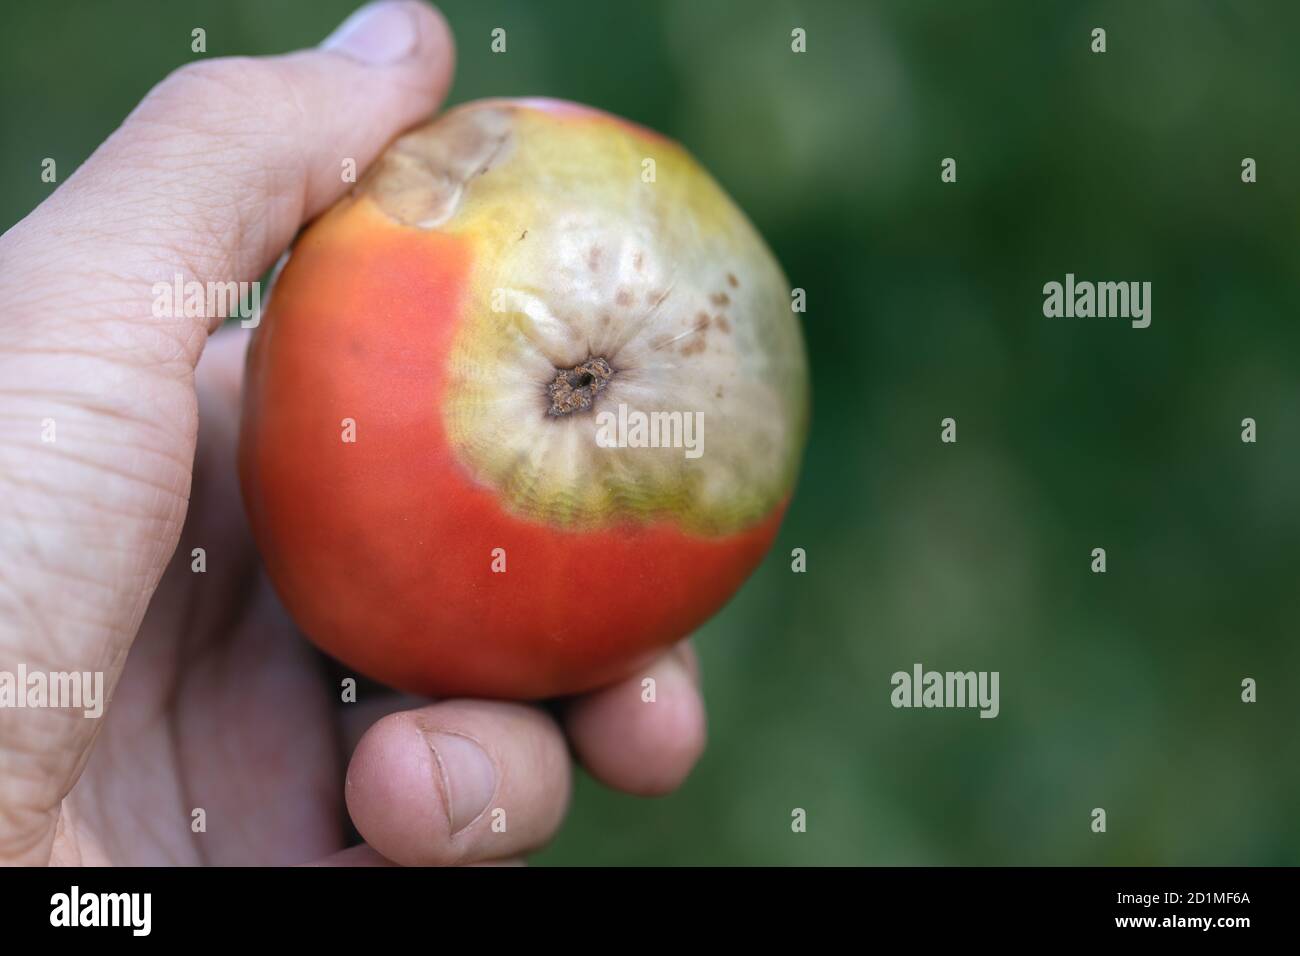 man holds tomato with rotten top, fruit is infected with fungal disease Stock Photo